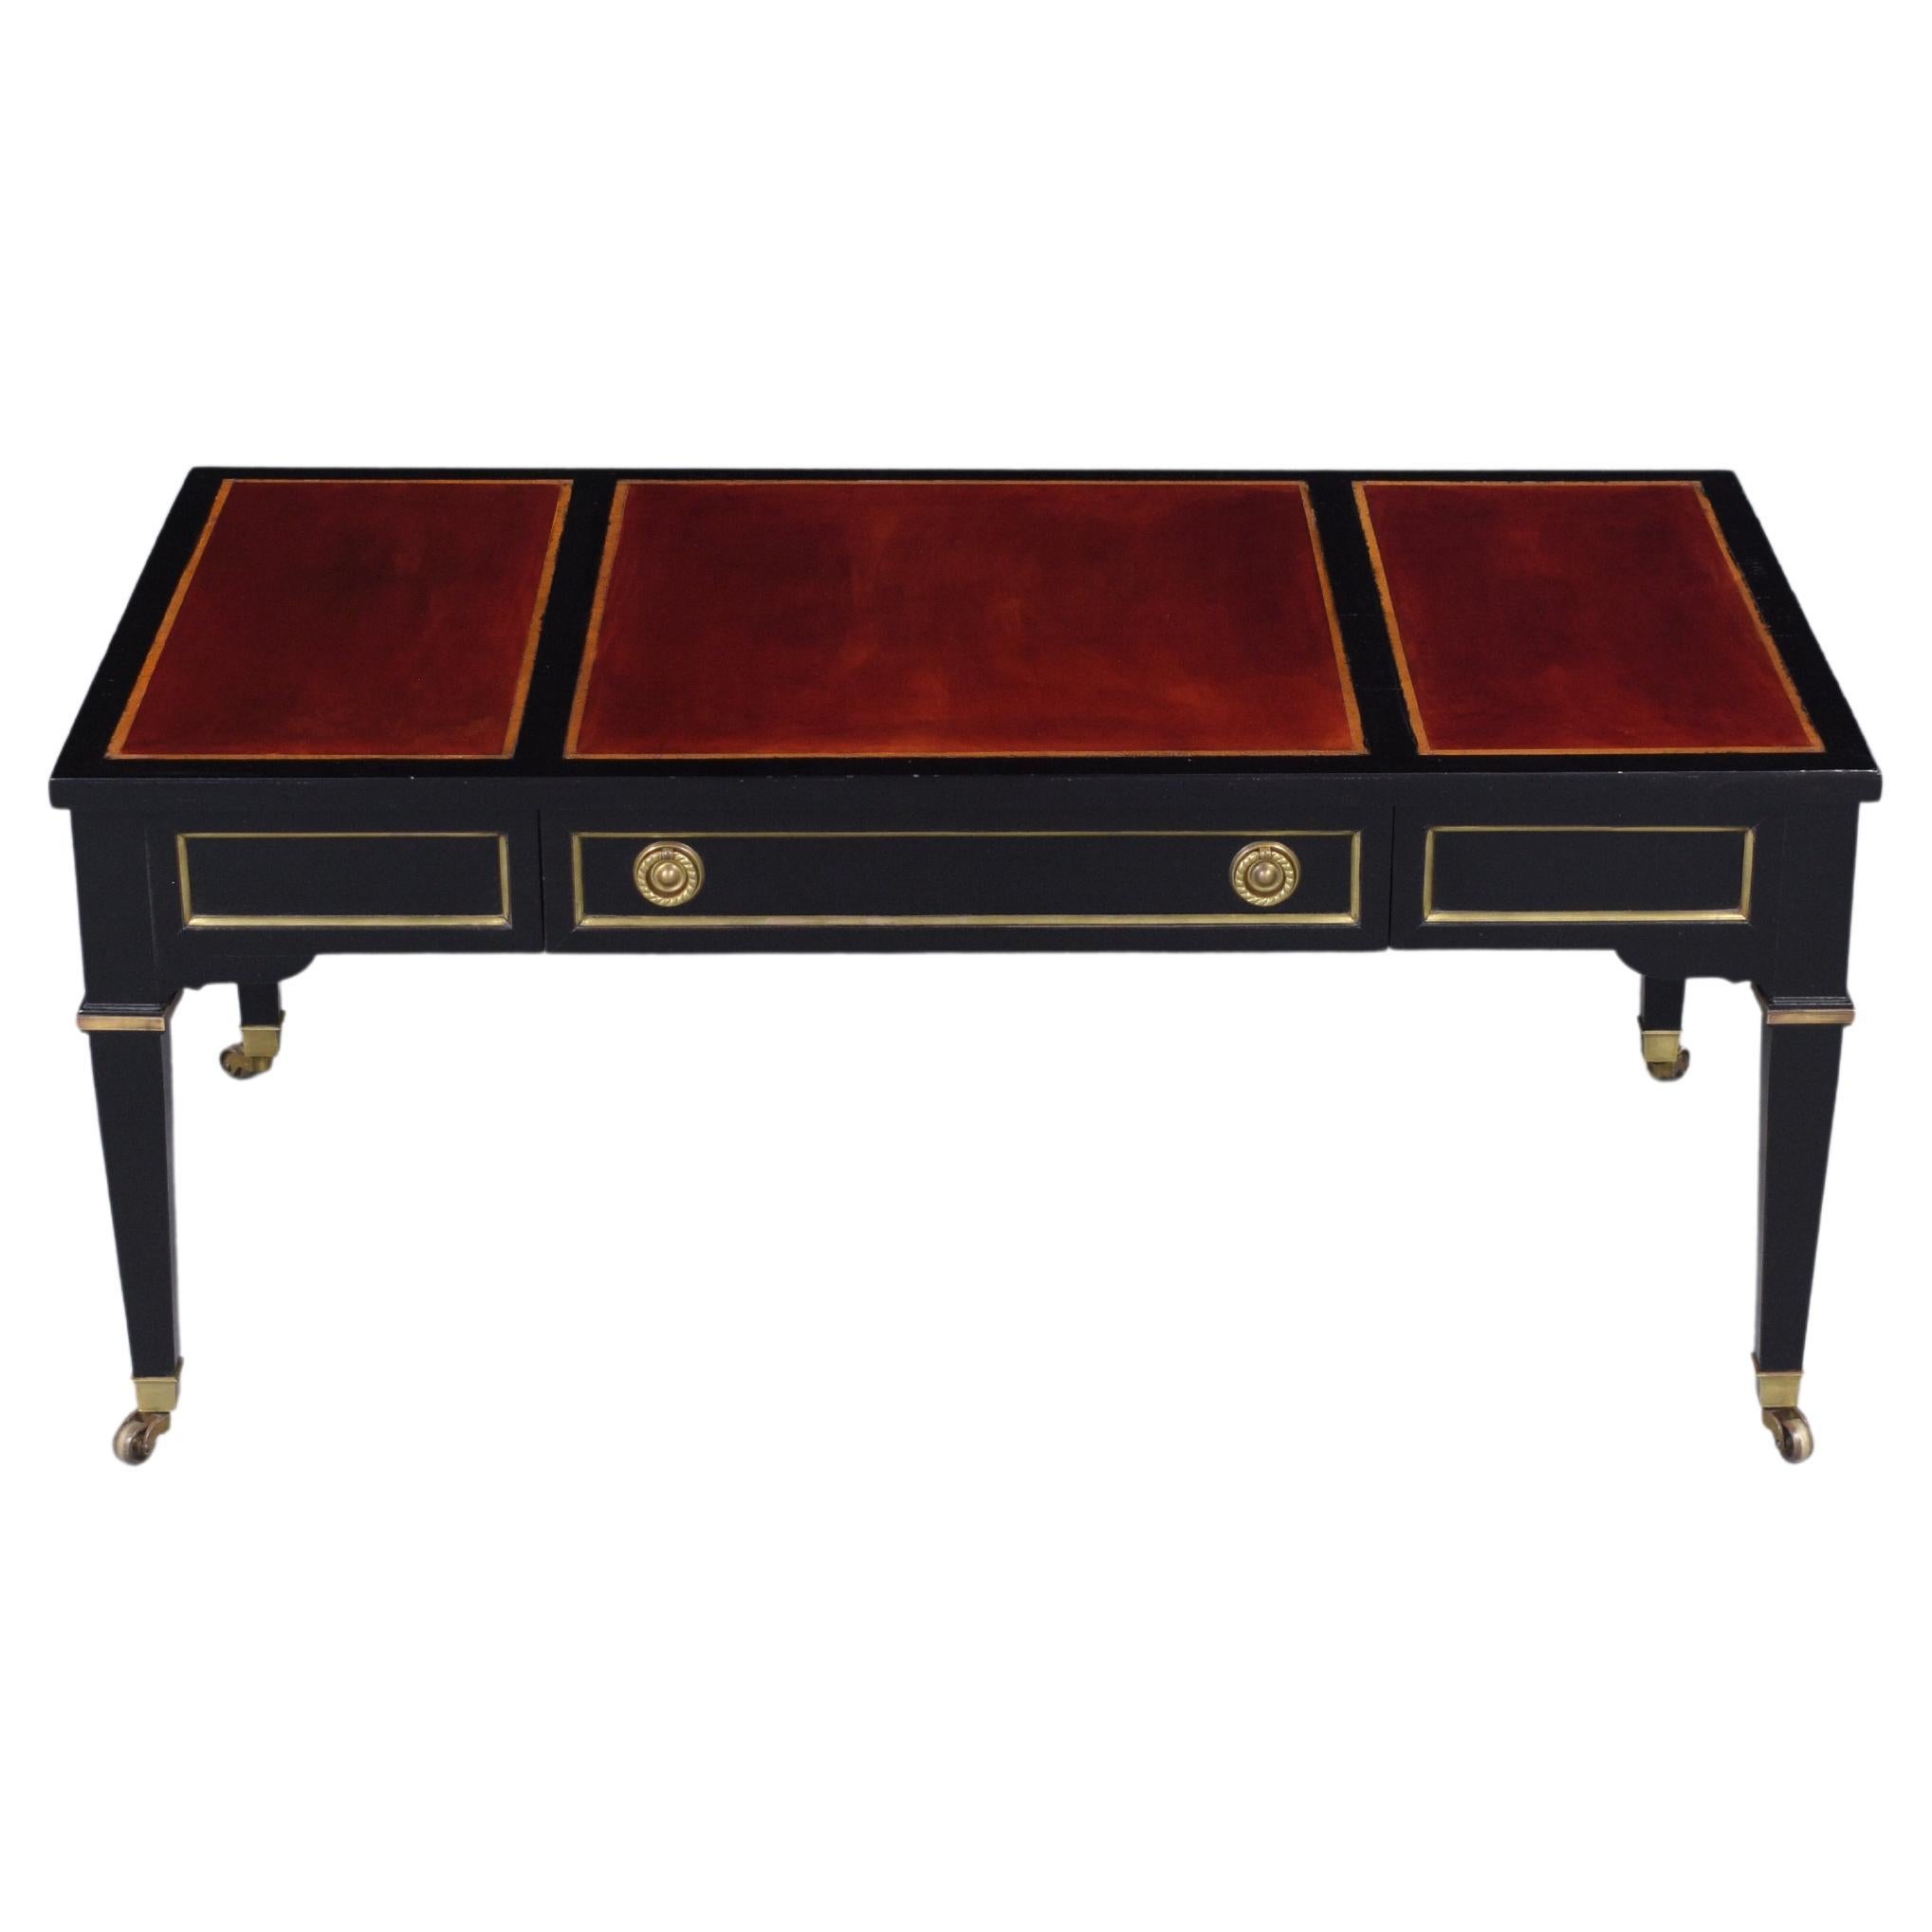 Hollywood Regency-Style Coffee Table by Heritage Henredon: 1960s Luxury